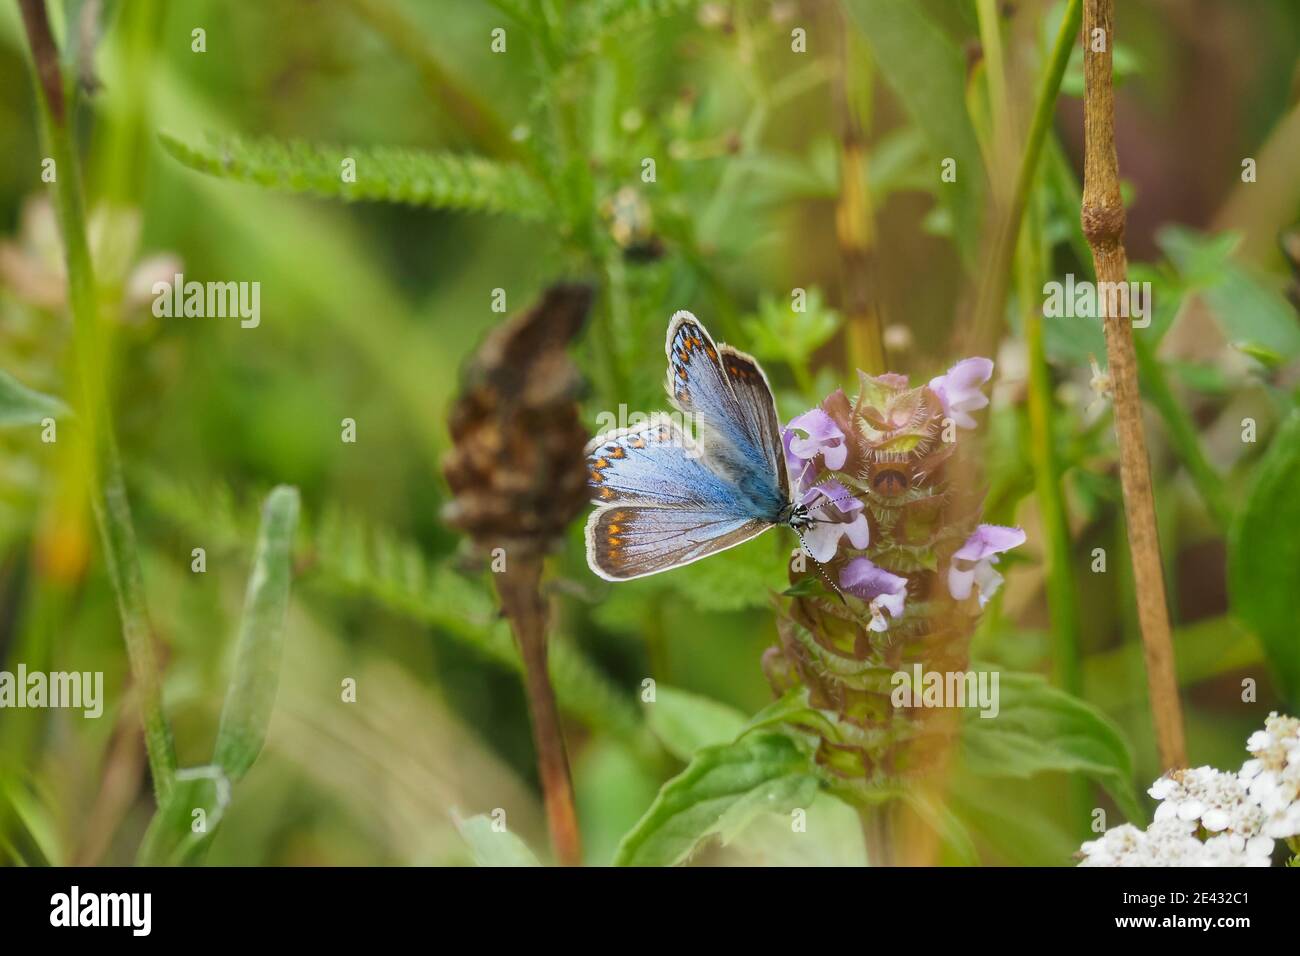 The common blue butterfly (Polyommatus icarus) is a butterfly in the family Lycaenidae and subfamily Polyommatinae. , beatiful photo Stock Photo